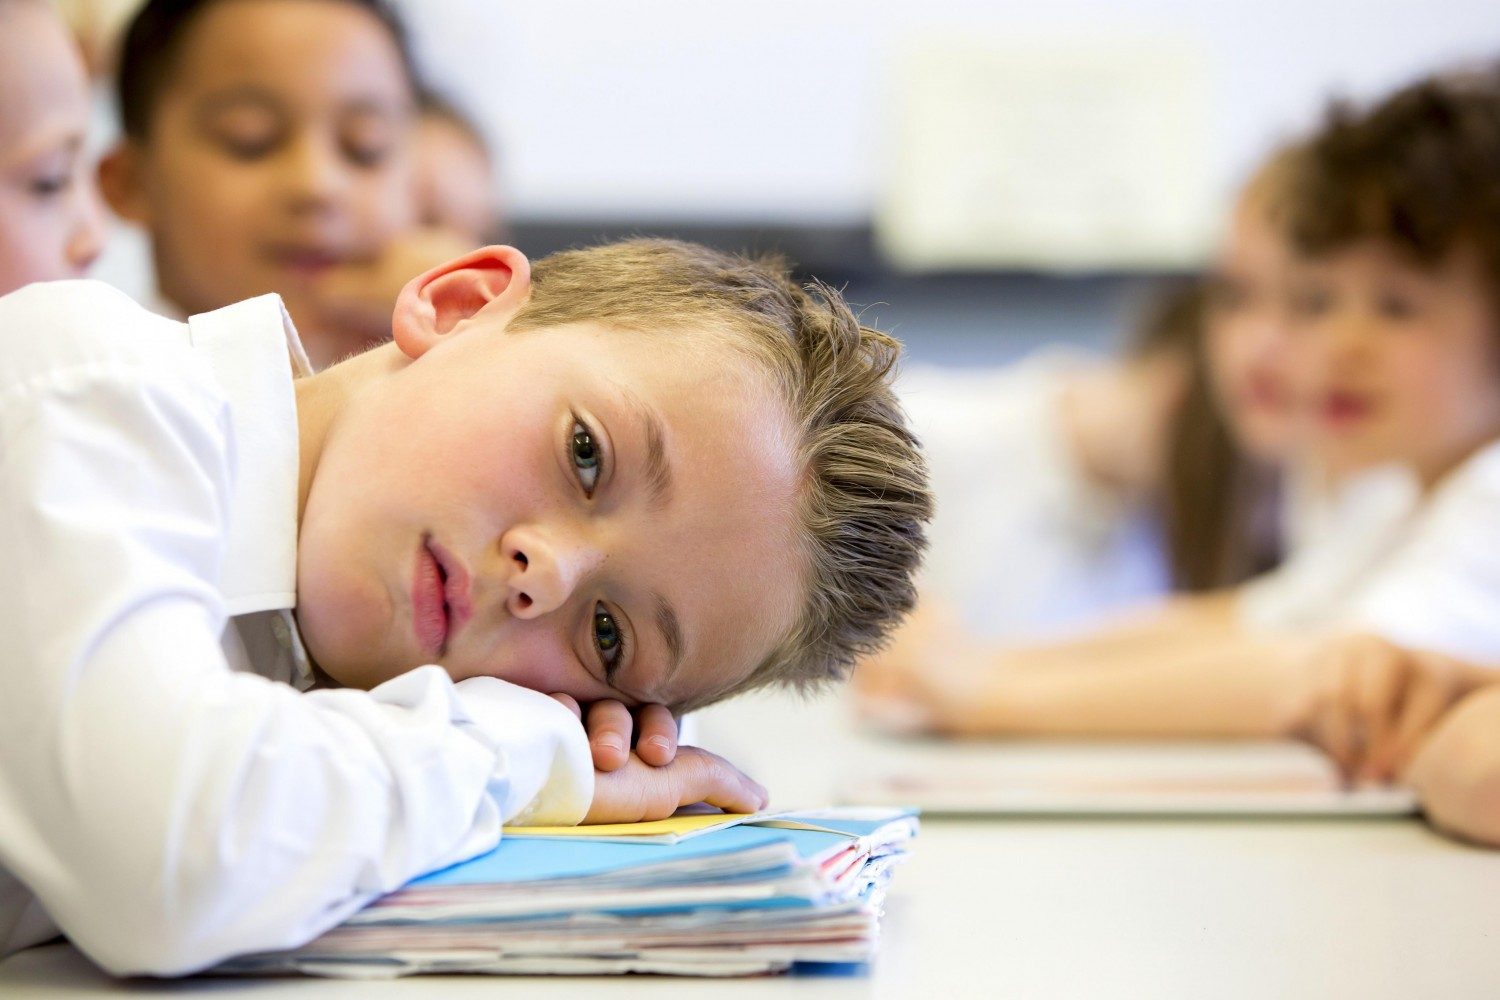 Signs Your Child is Struggling in School